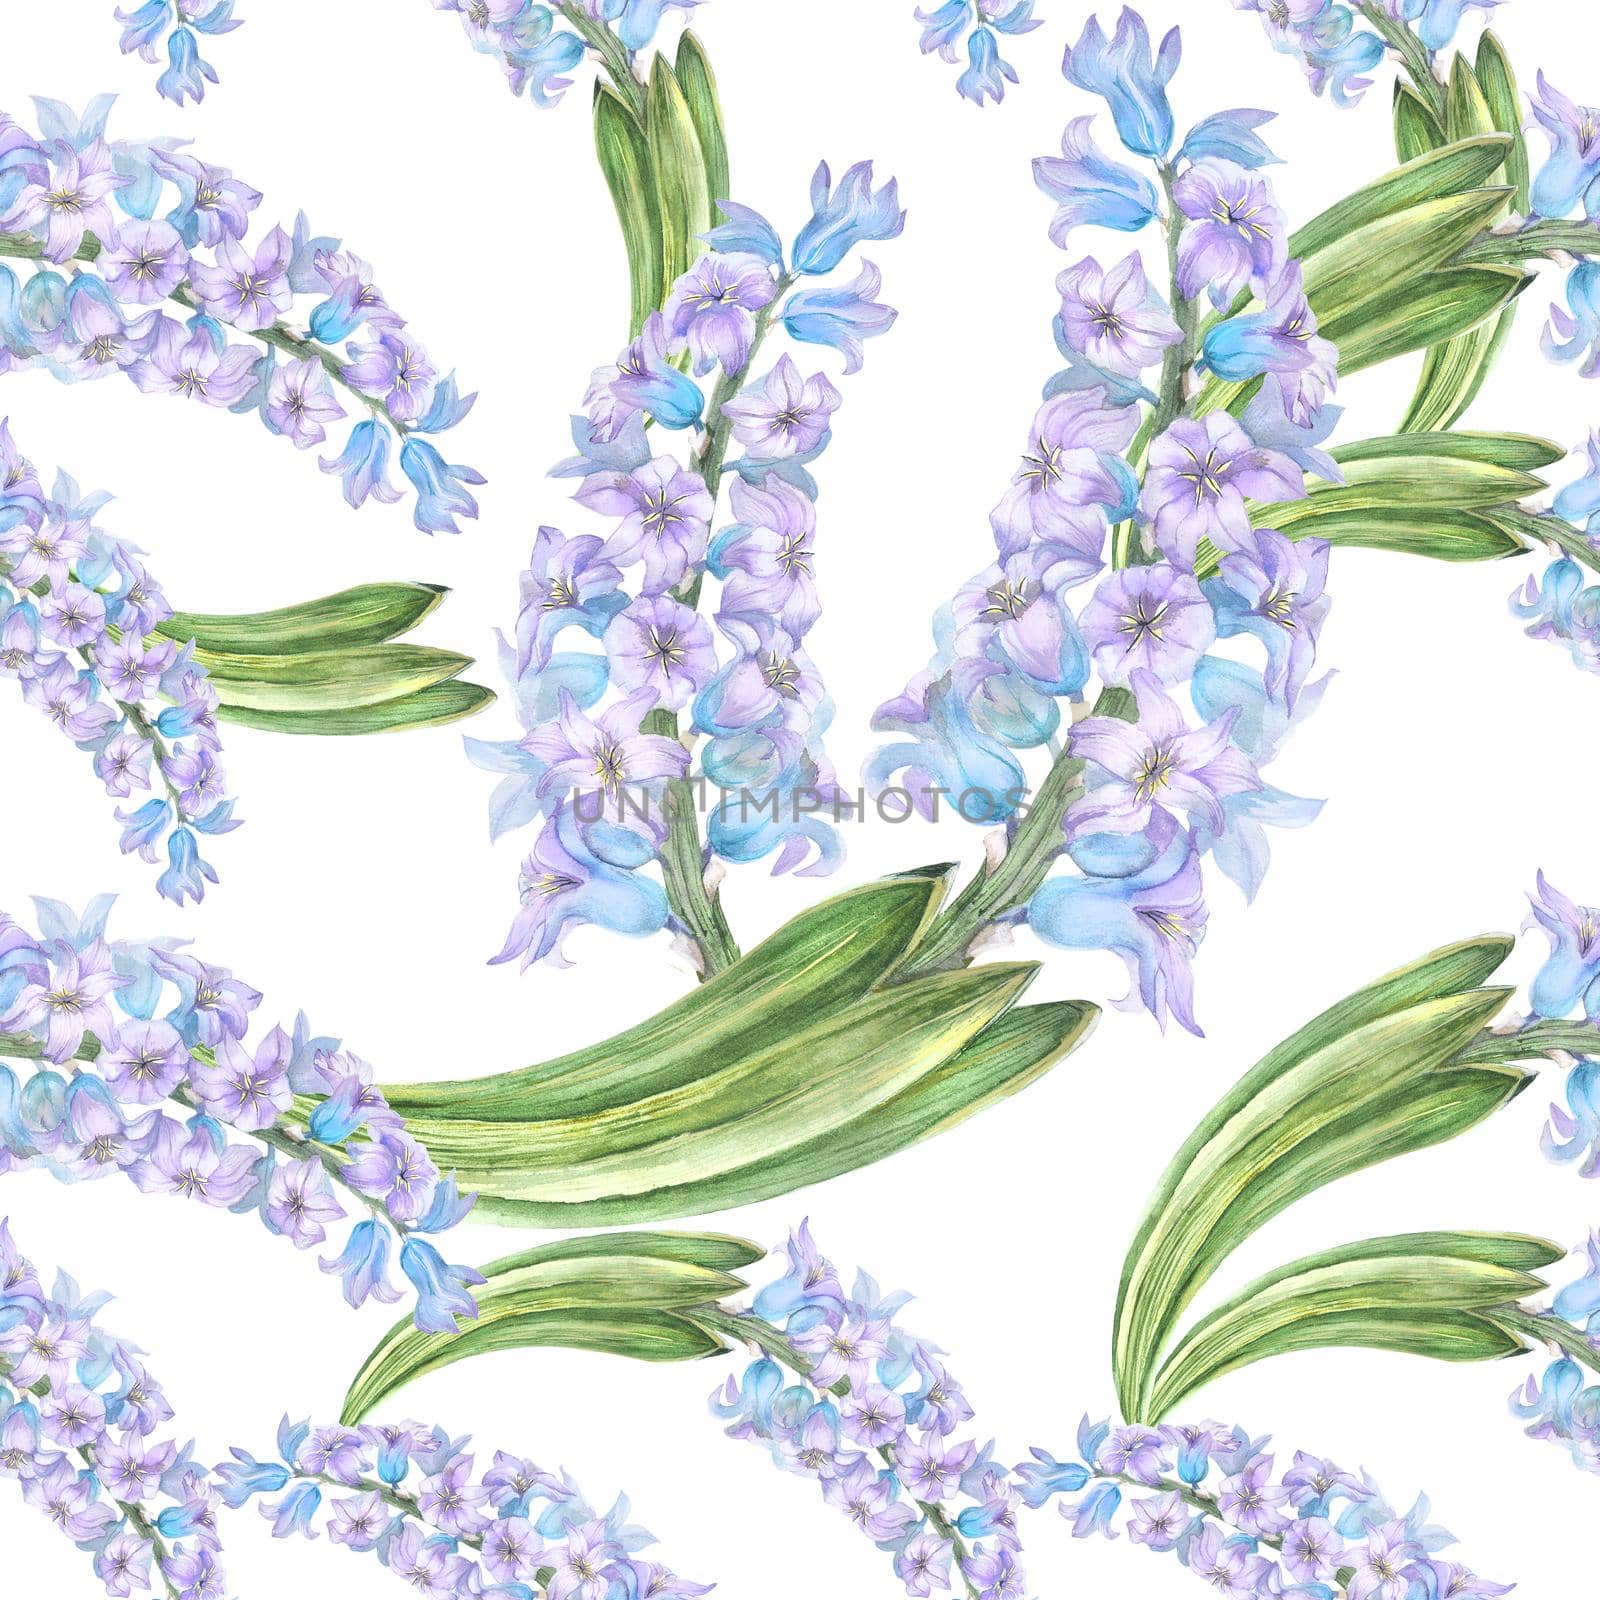 Modern watercolor botanical illustration in Old School style. Blue hyacinth. Seamless patterns, path included